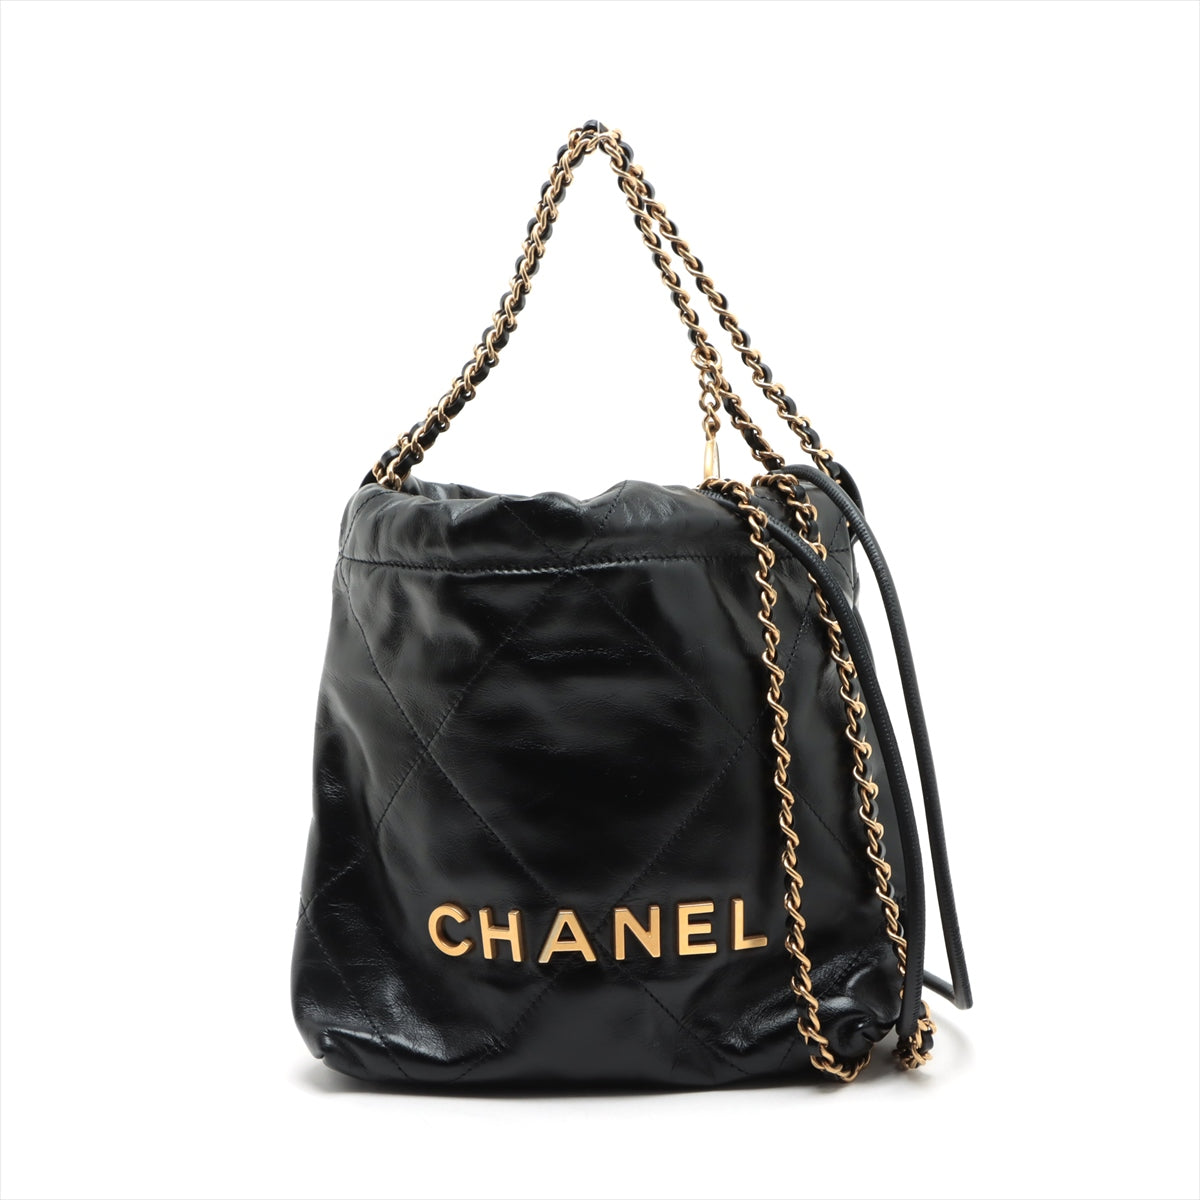 Chanel Chanel 22 mini Leather Chain shoulder bag Black Gold Metal fittings